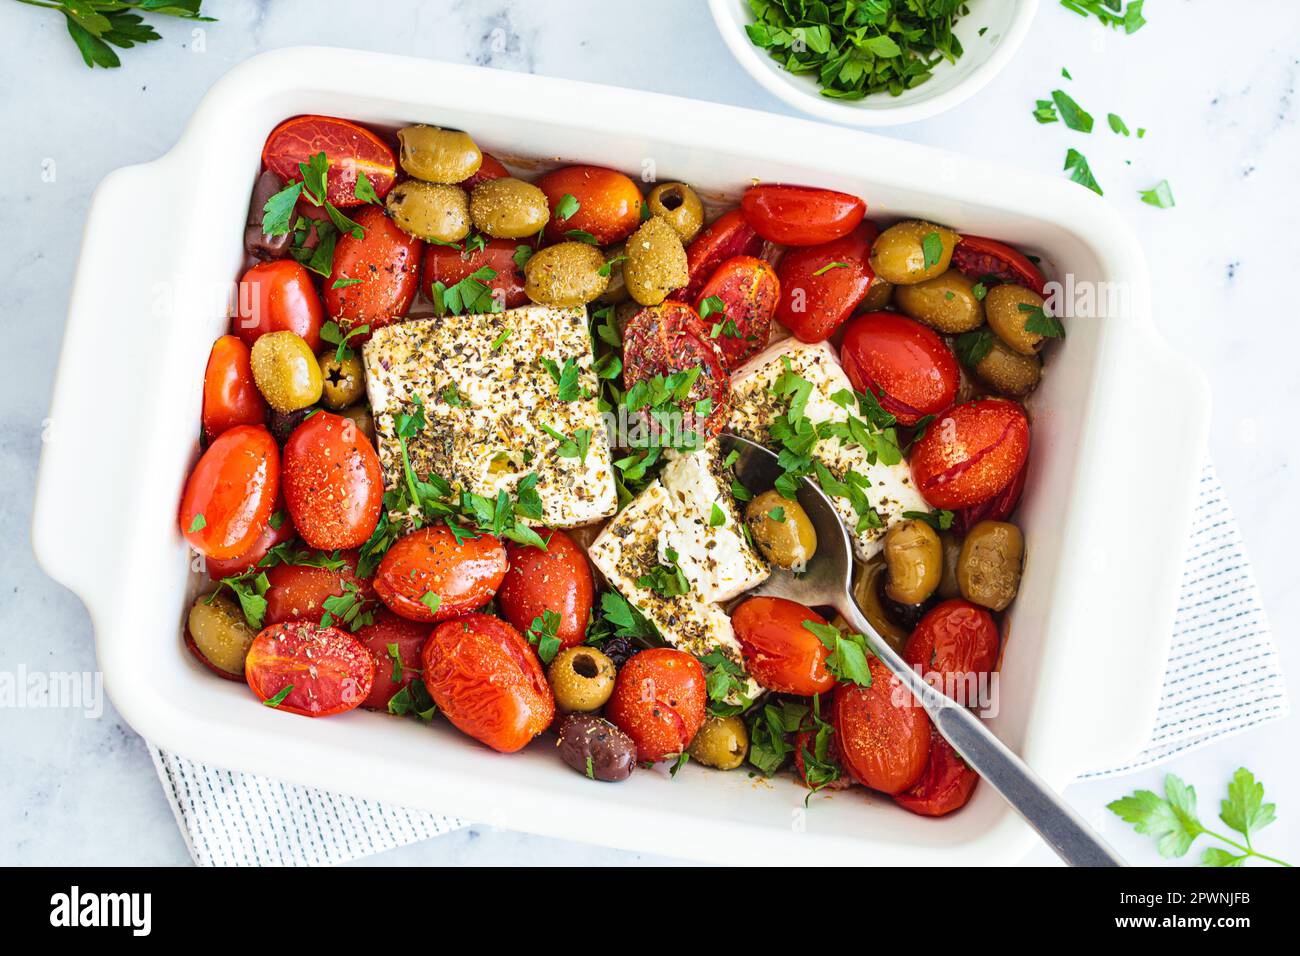 Baked feta cheese with cherry tomatoes and olives on a white table, top view. Stock Photo